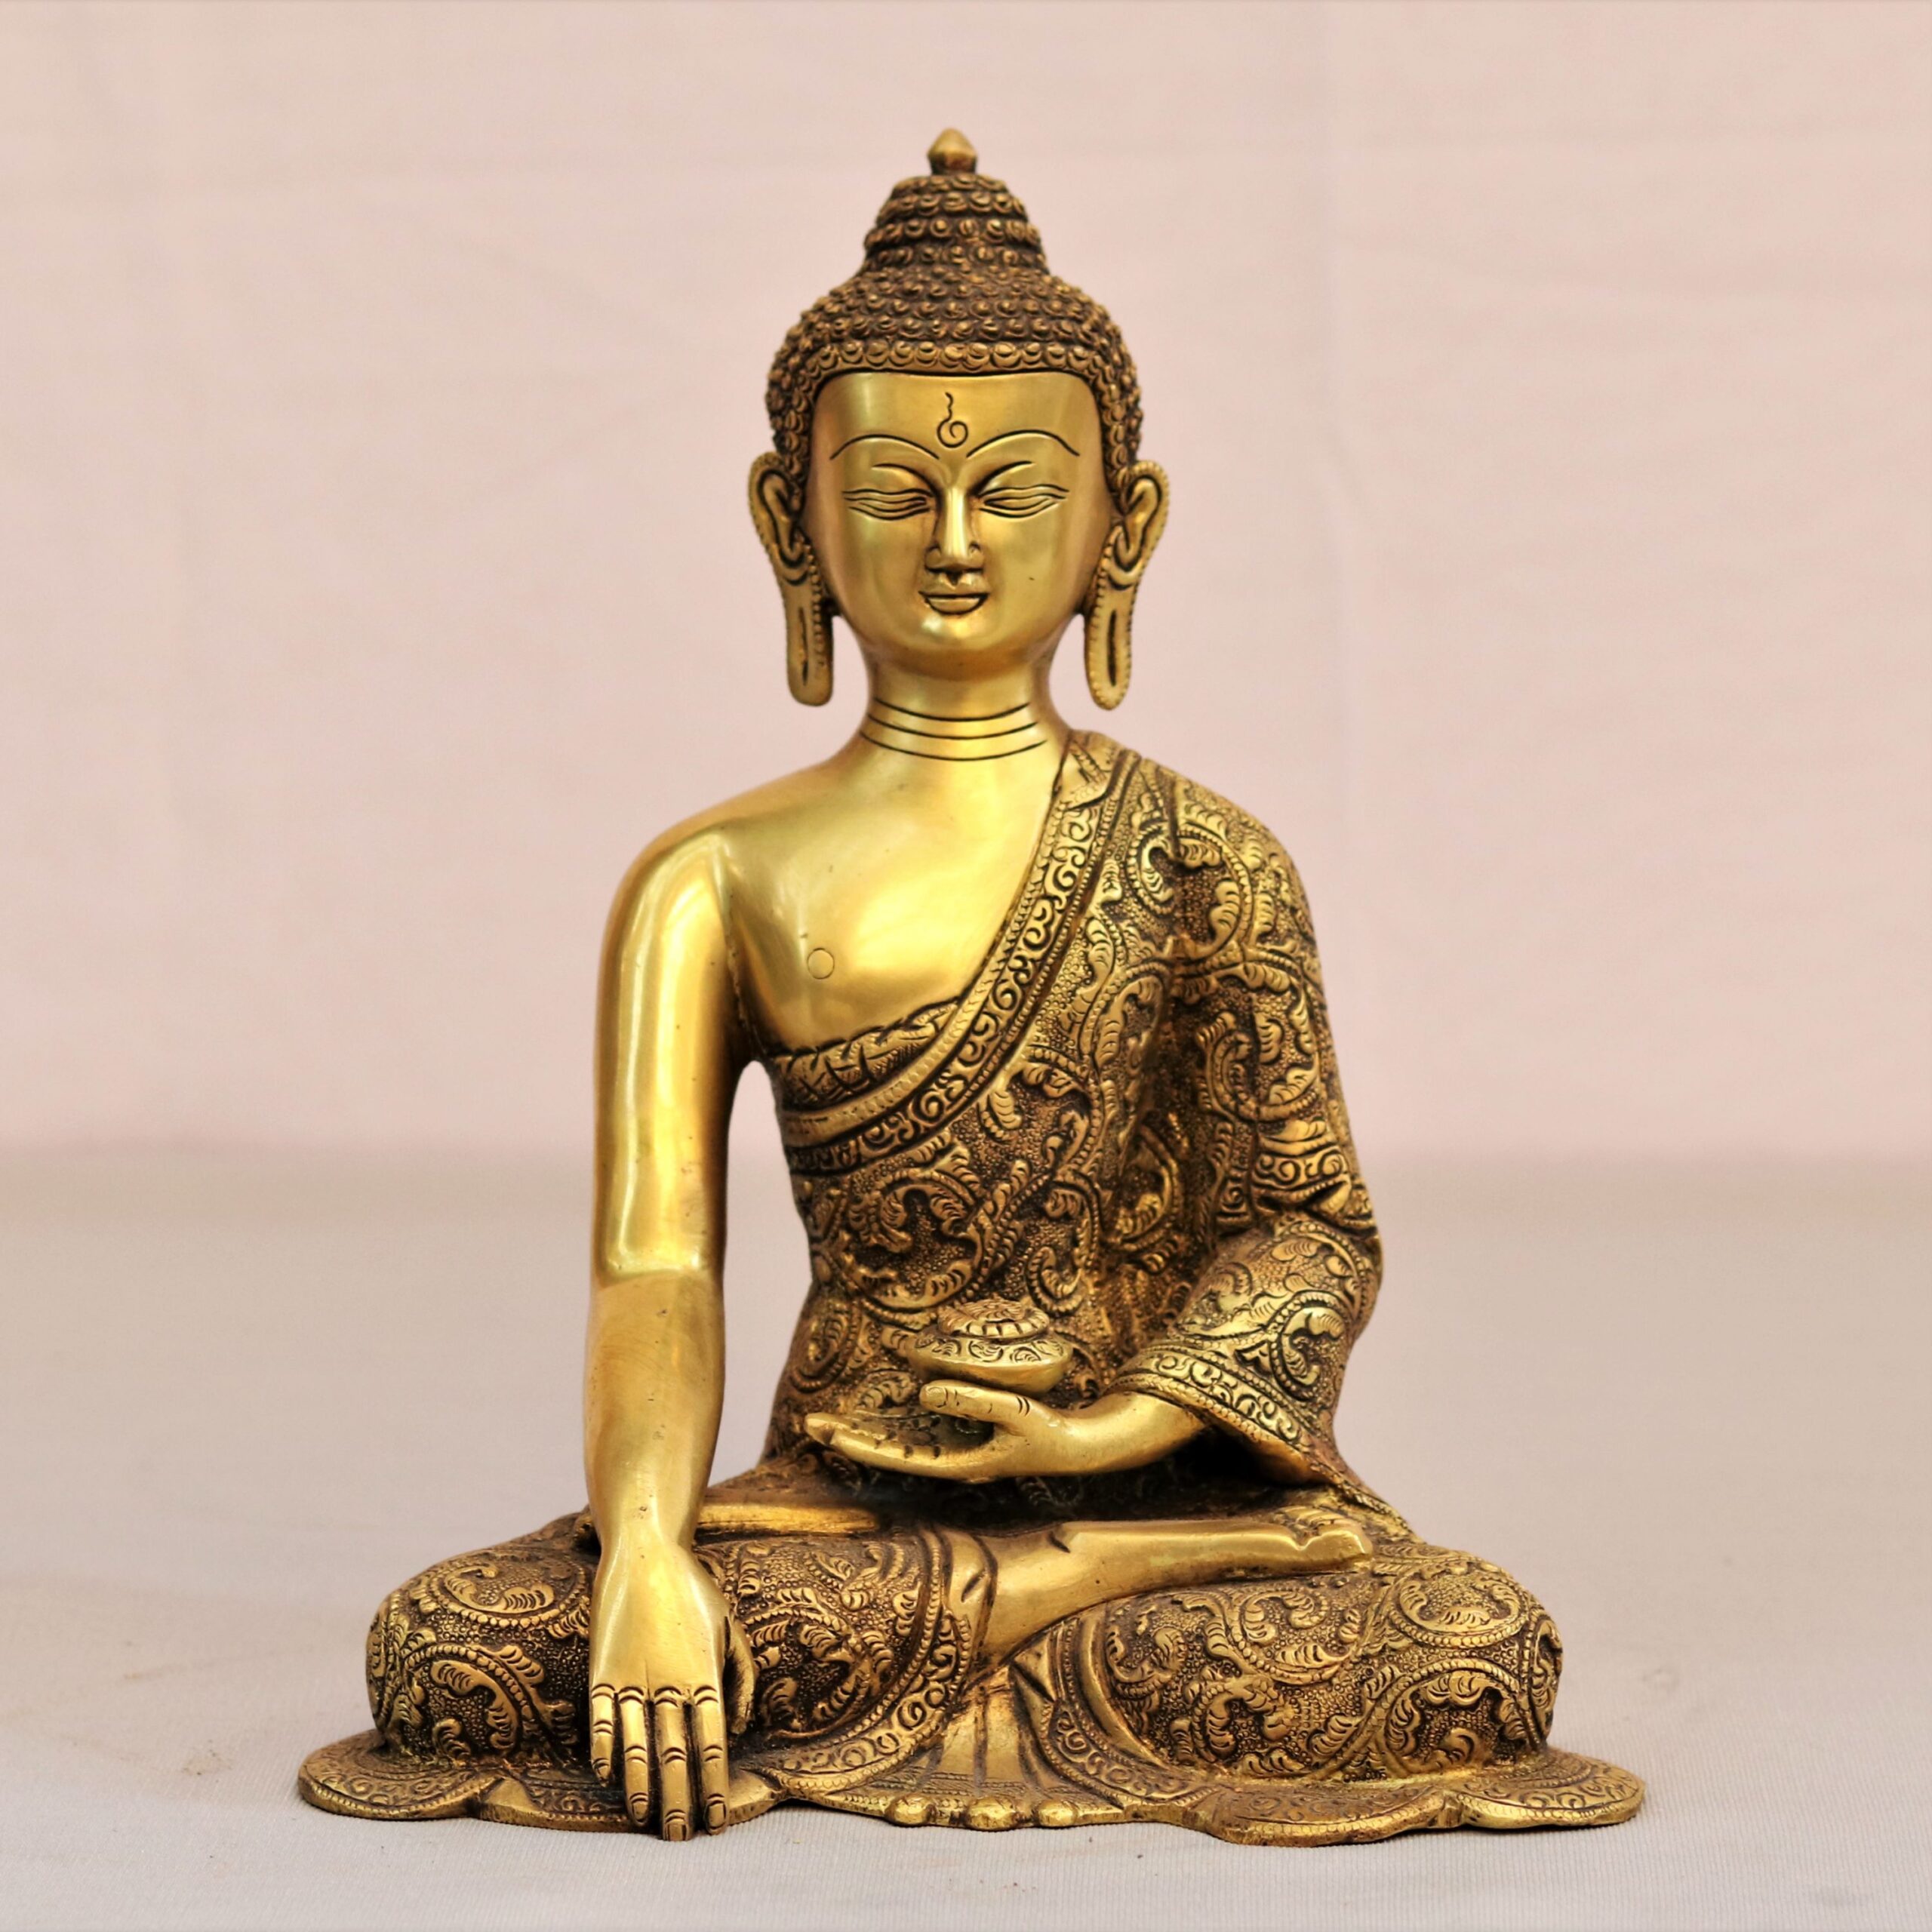 Brass Statue Archives - Buy exclusive brass statues, collectibles